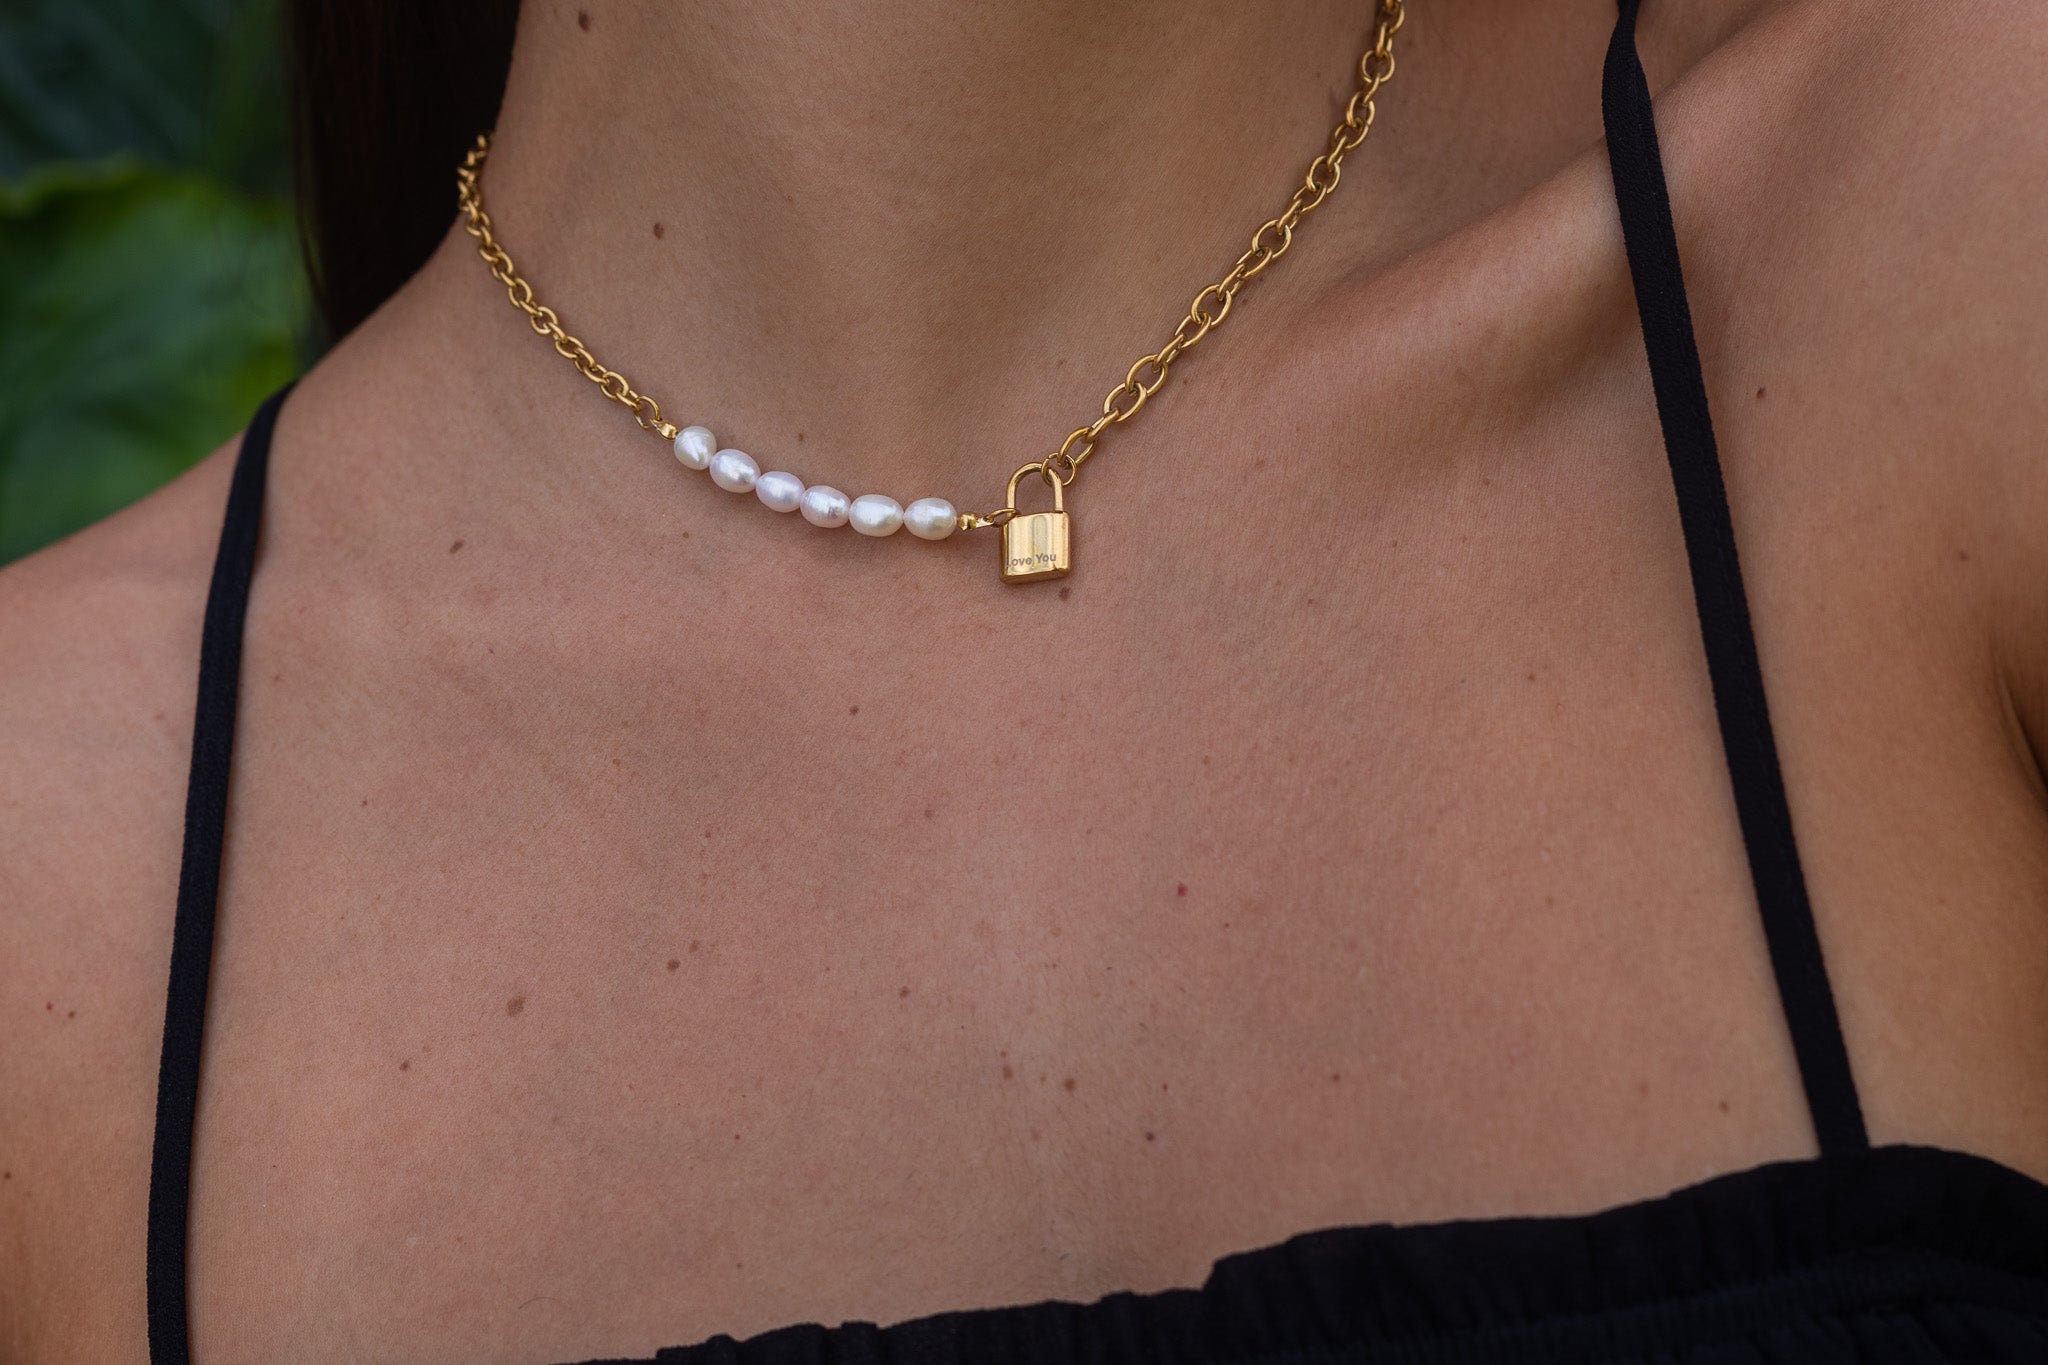 "I love you" Necklace - freshwater pearls and chain